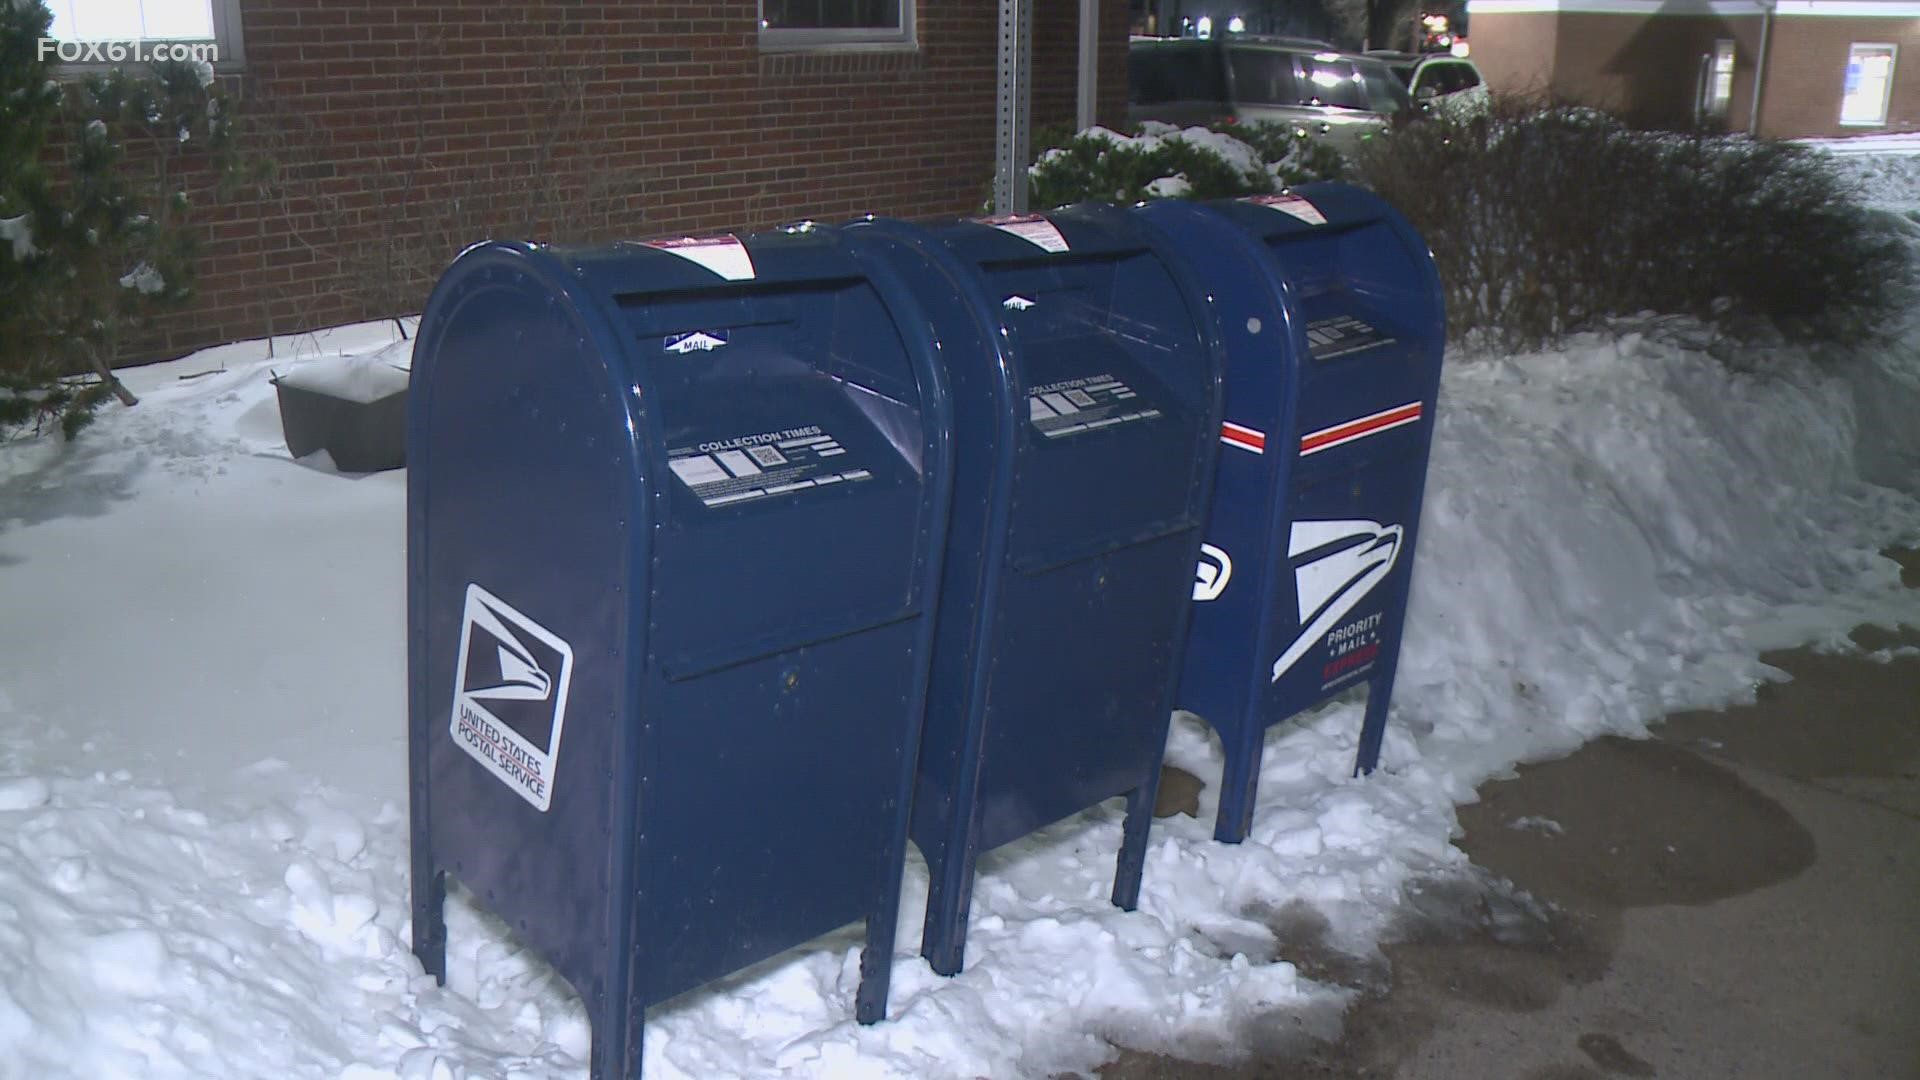 Glastonbury Police are investigating complaints of check thefts from blue mail collection boxes.